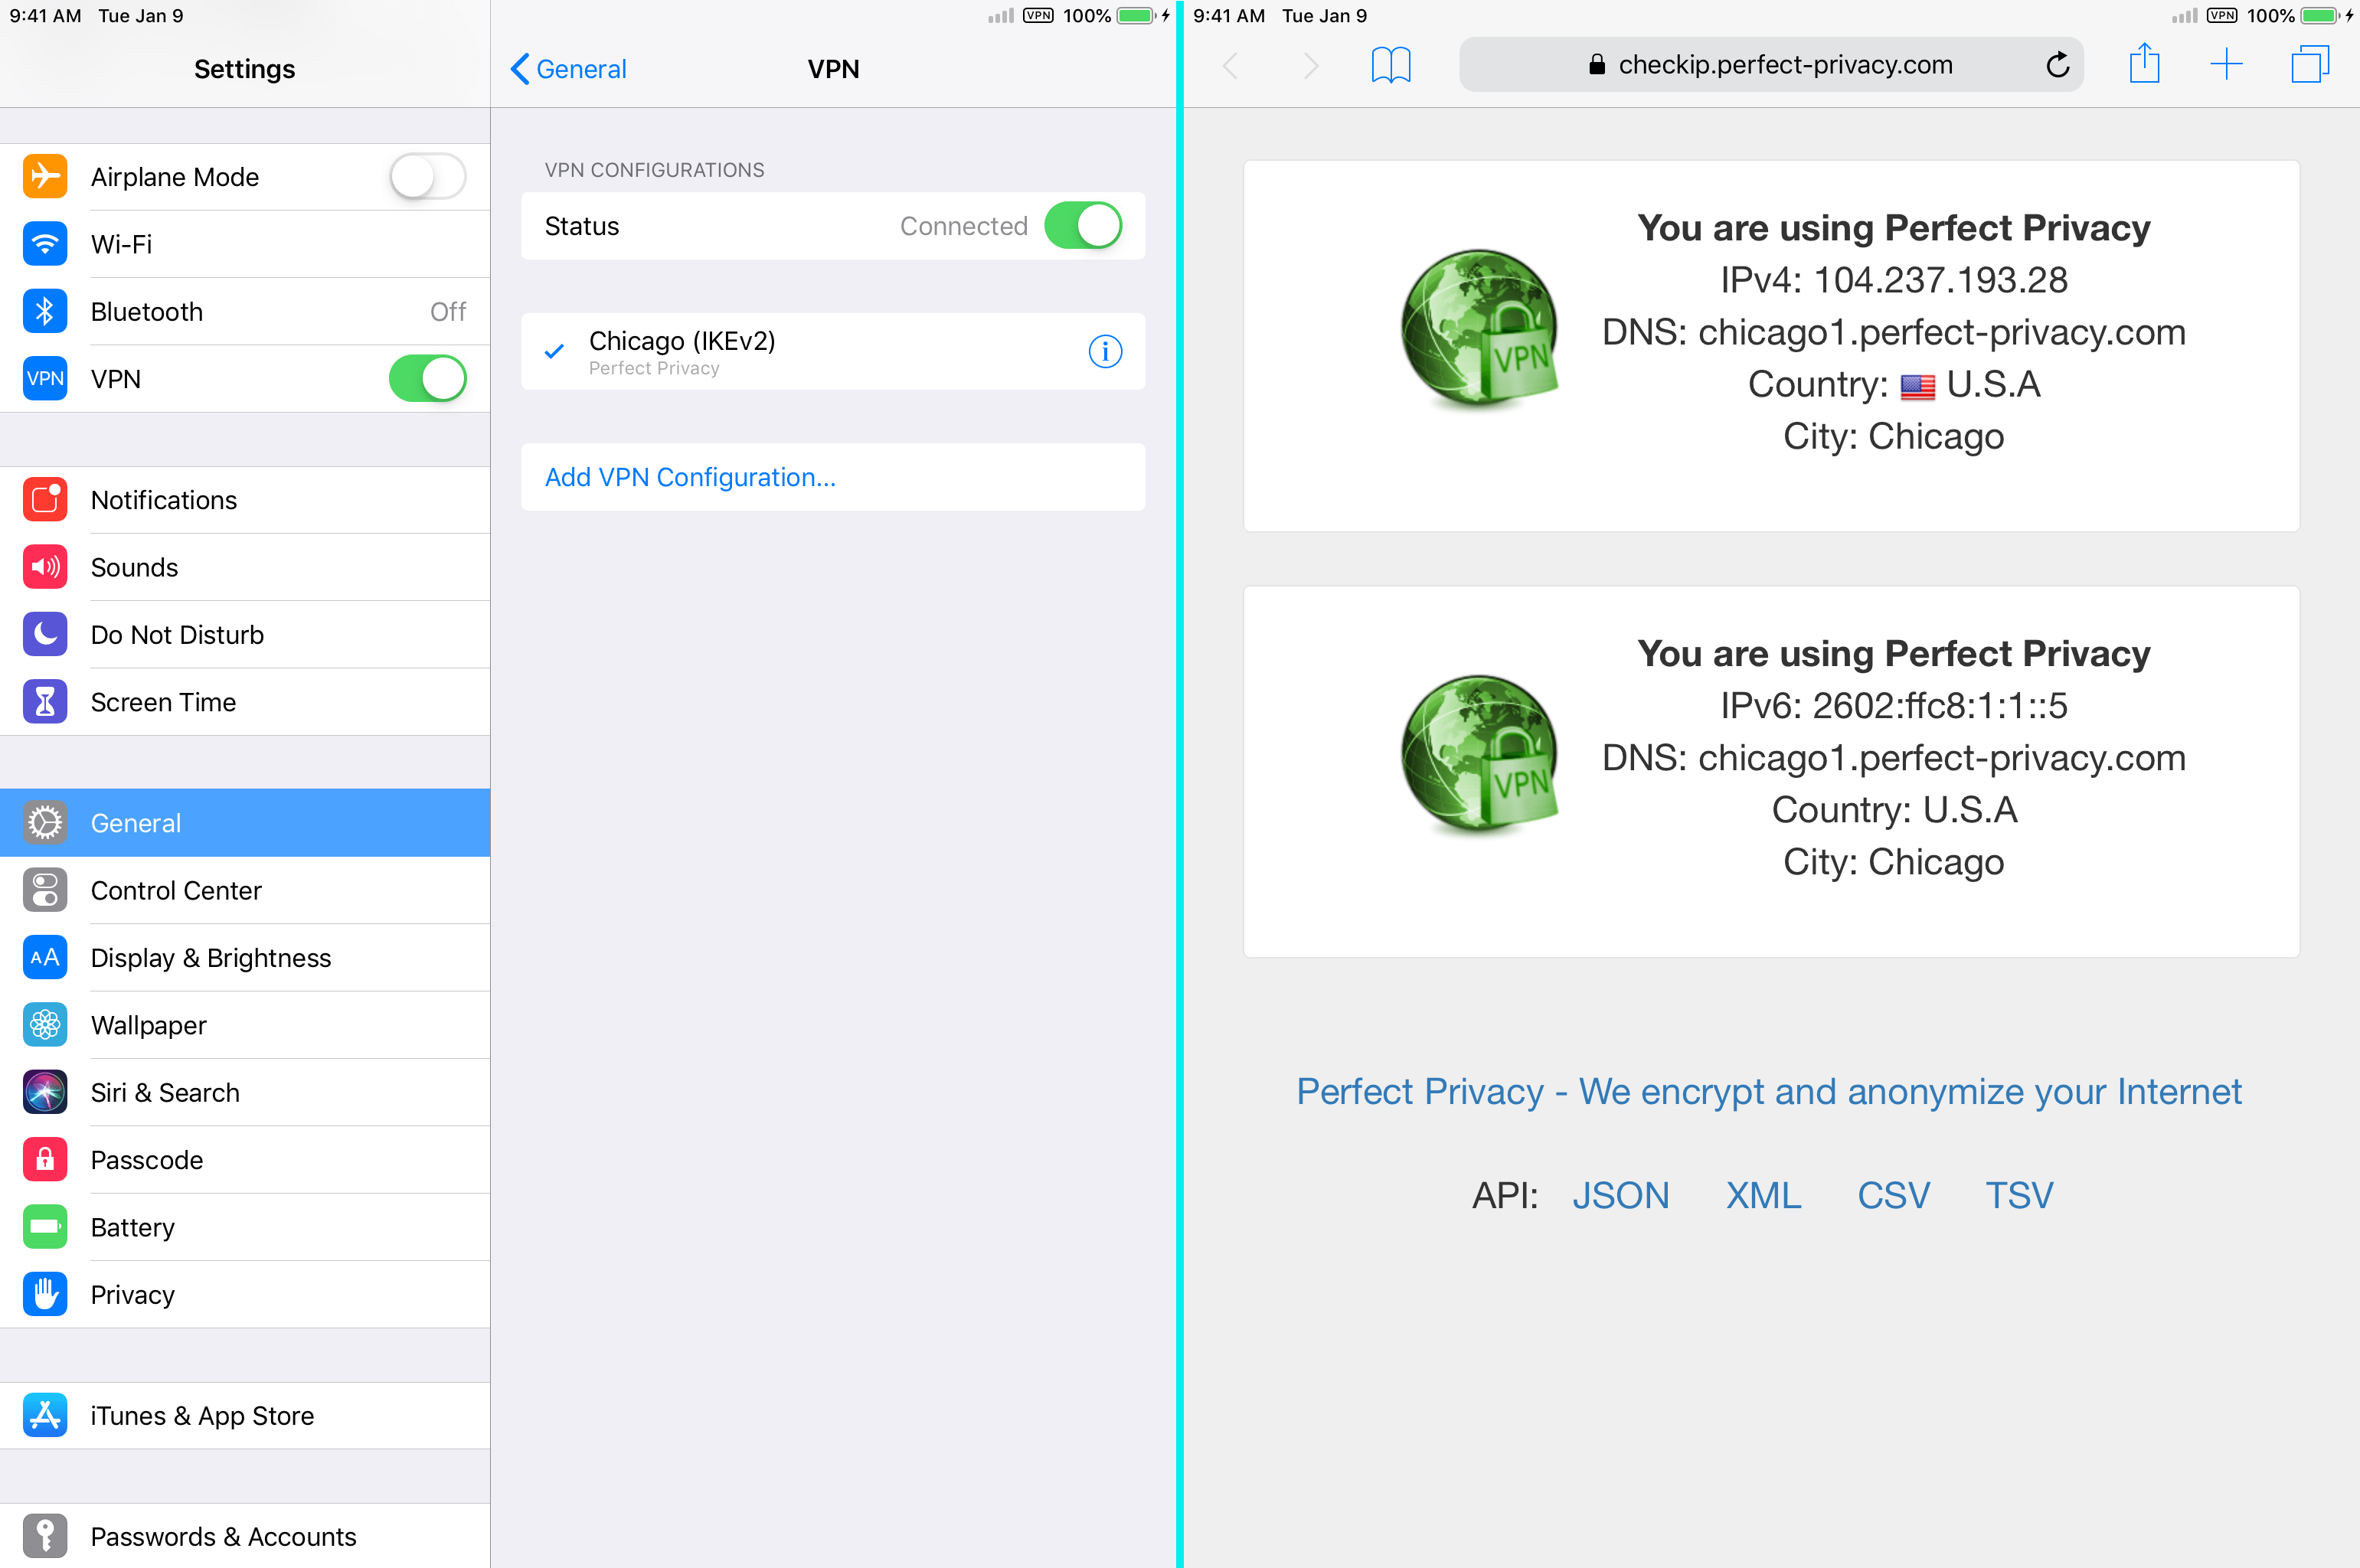 iOS: Check the VPN connection to Perfect Privacy | VPN on iPhone or iPad (IKEv2)